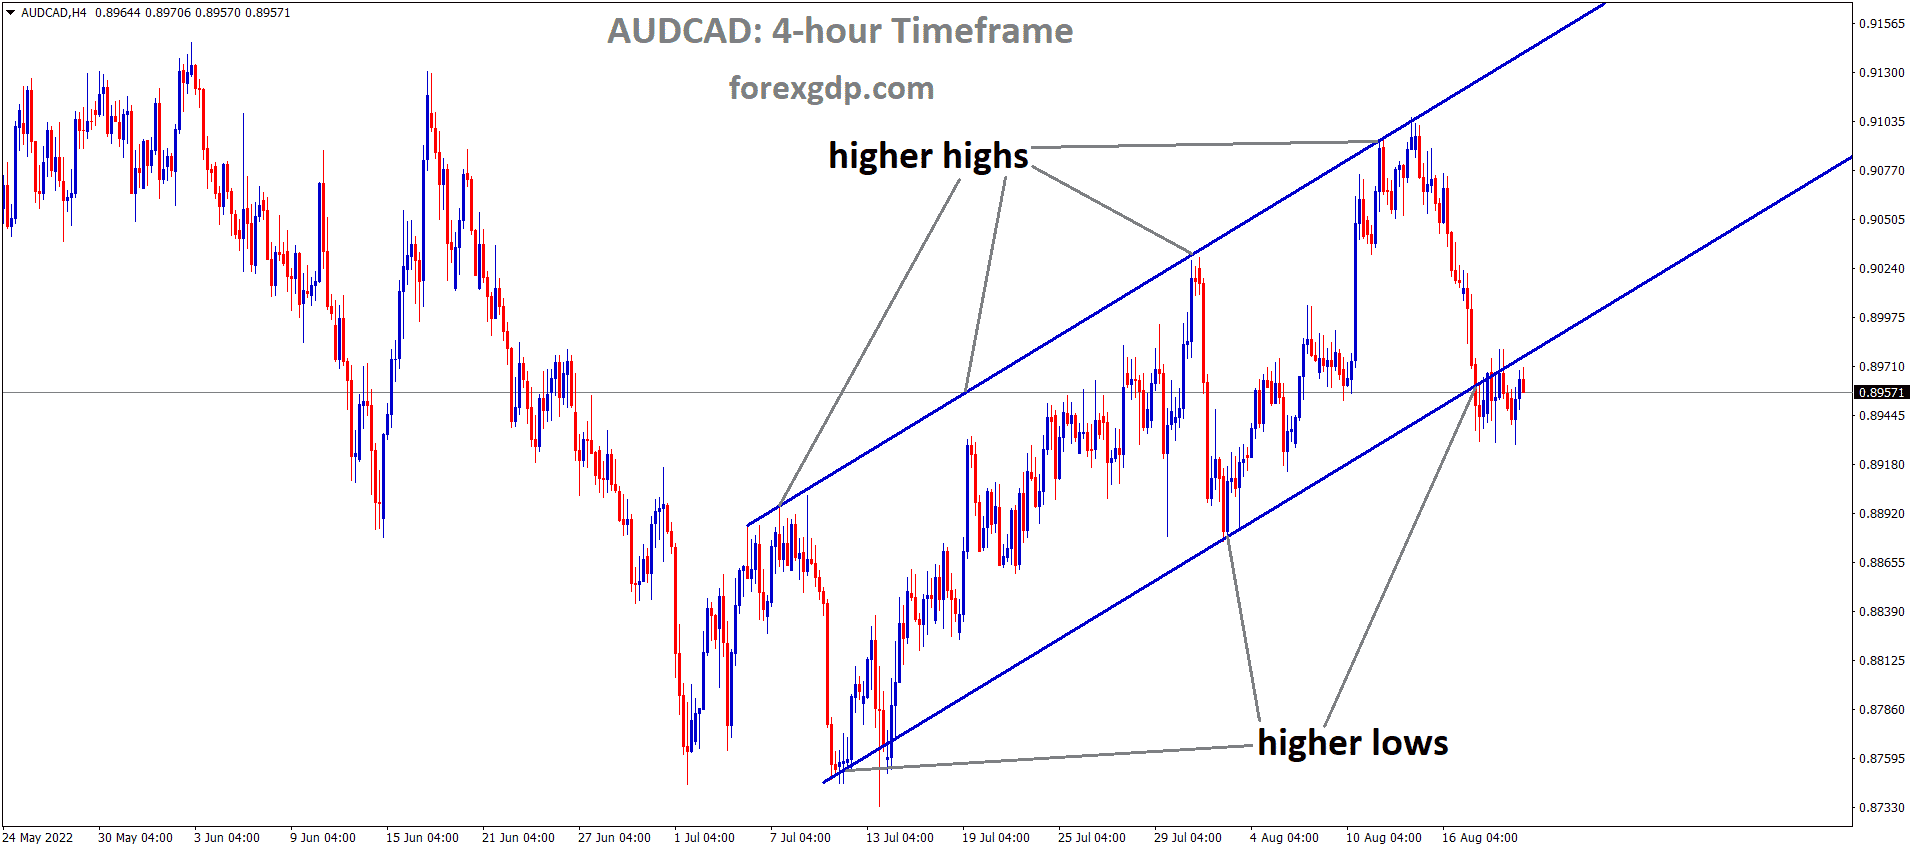 AUDCAD is moving in an Ascending channel and the Market has reached the higher low area of the channel 1